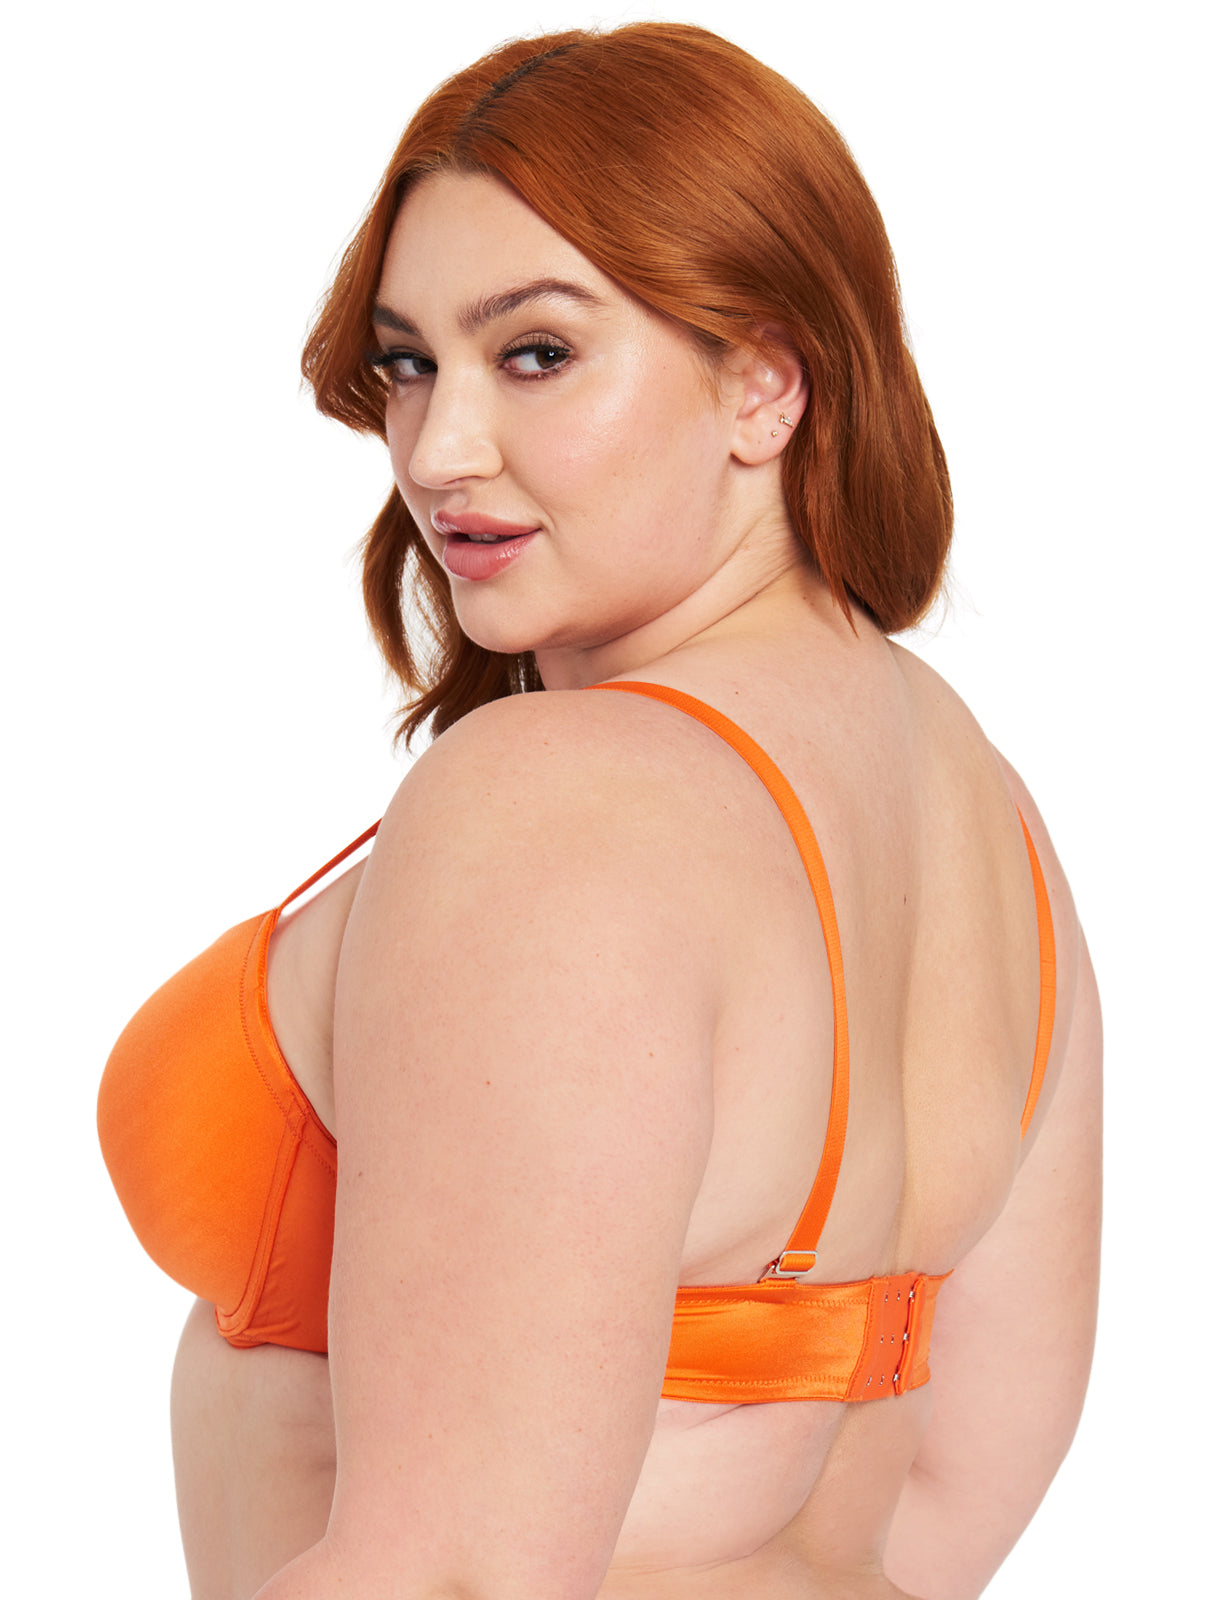 Target push up bra Red Size XS - $21 (30% Off Retail) - From jackie